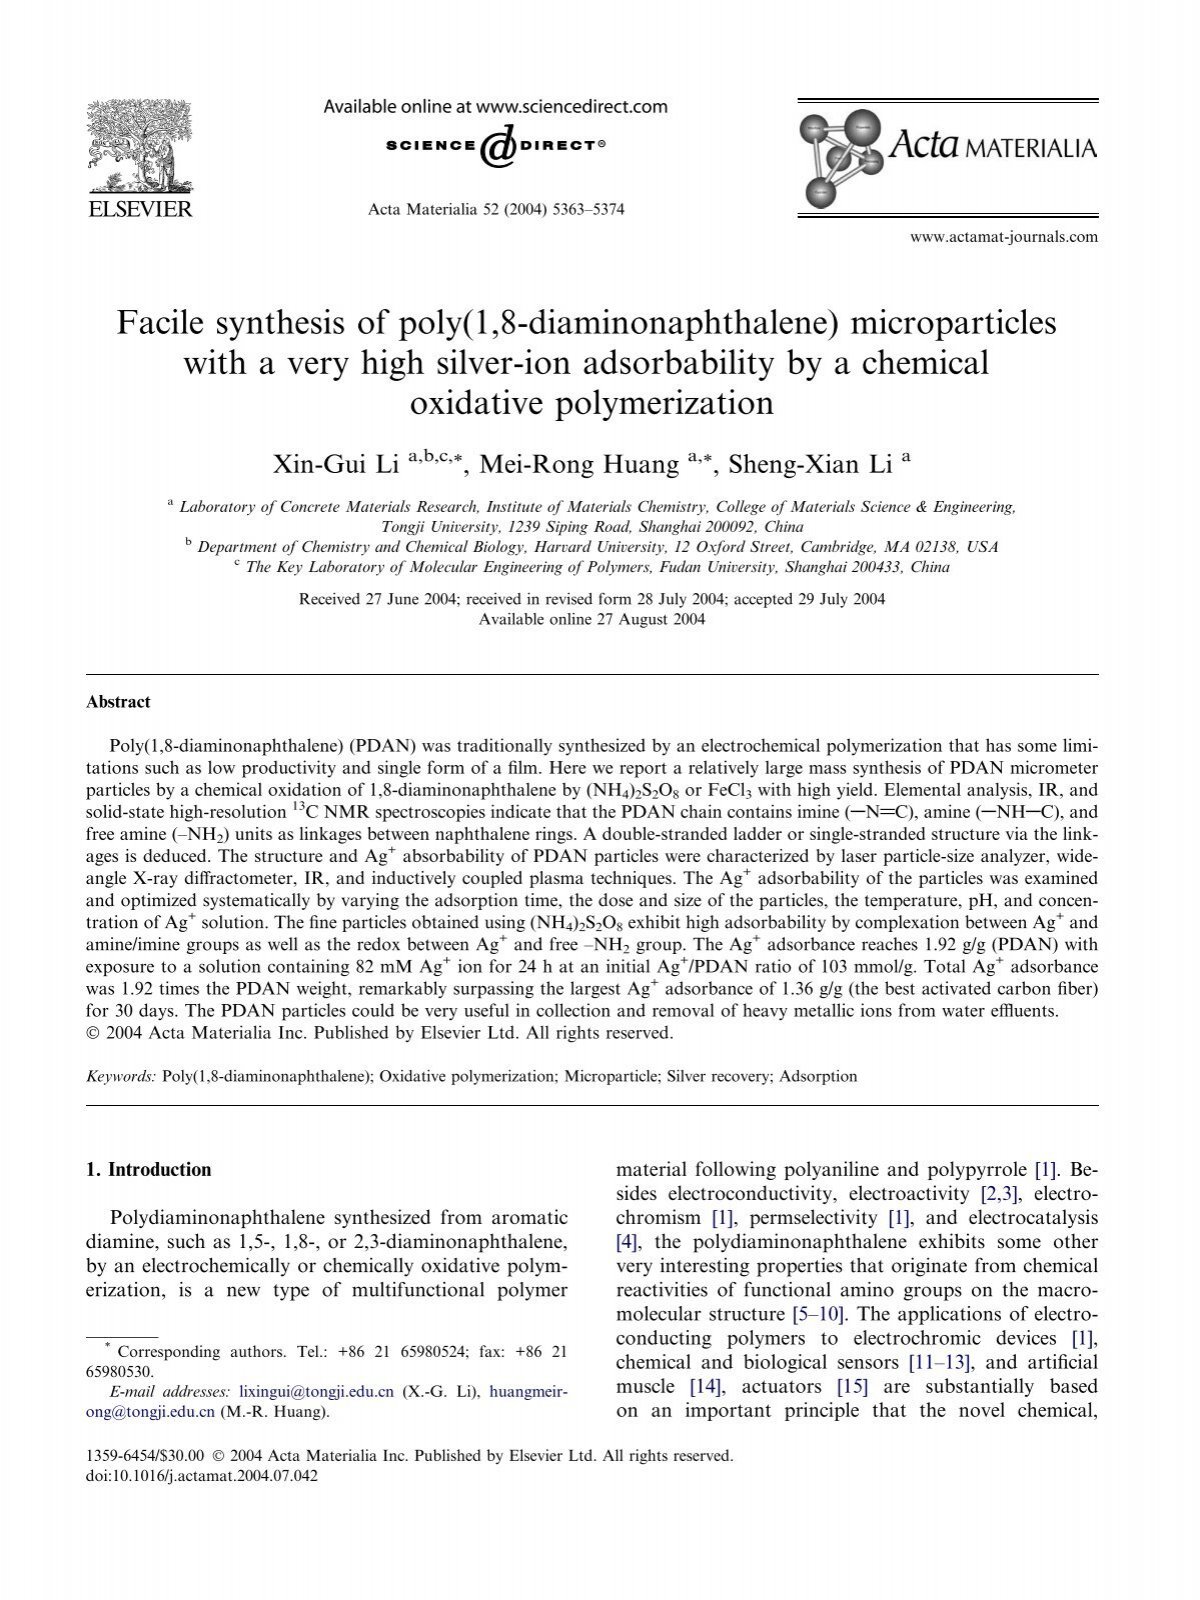 Facile Synthesis Of Poly 1 8 Diaminonaphthalene Microparticles